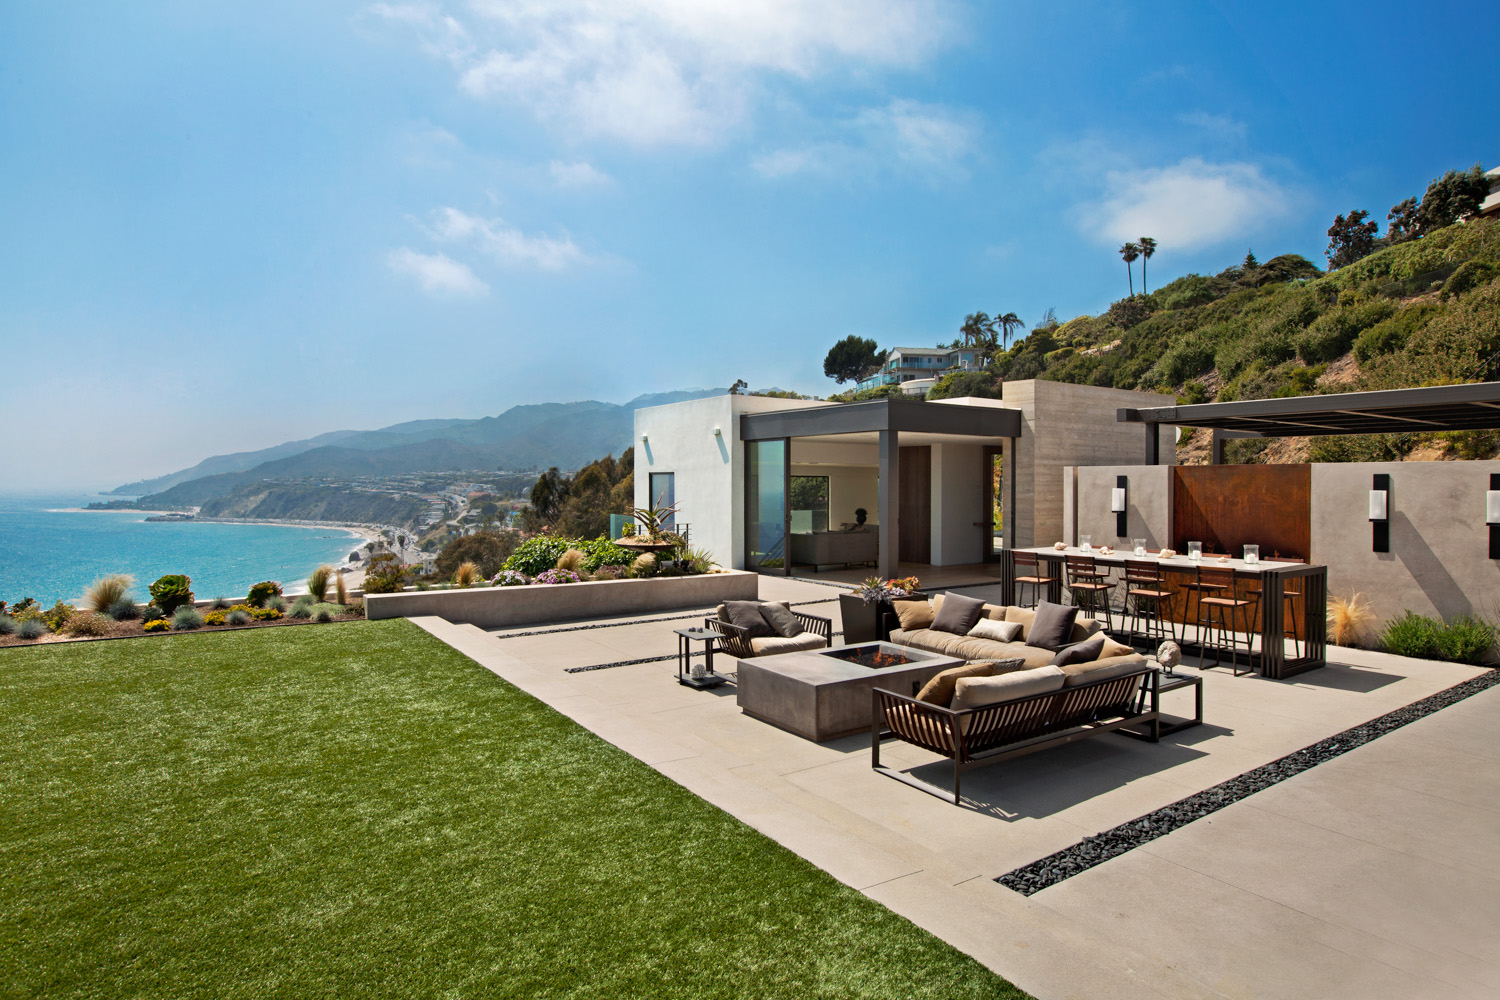 Pacific Palisades Ocean View House